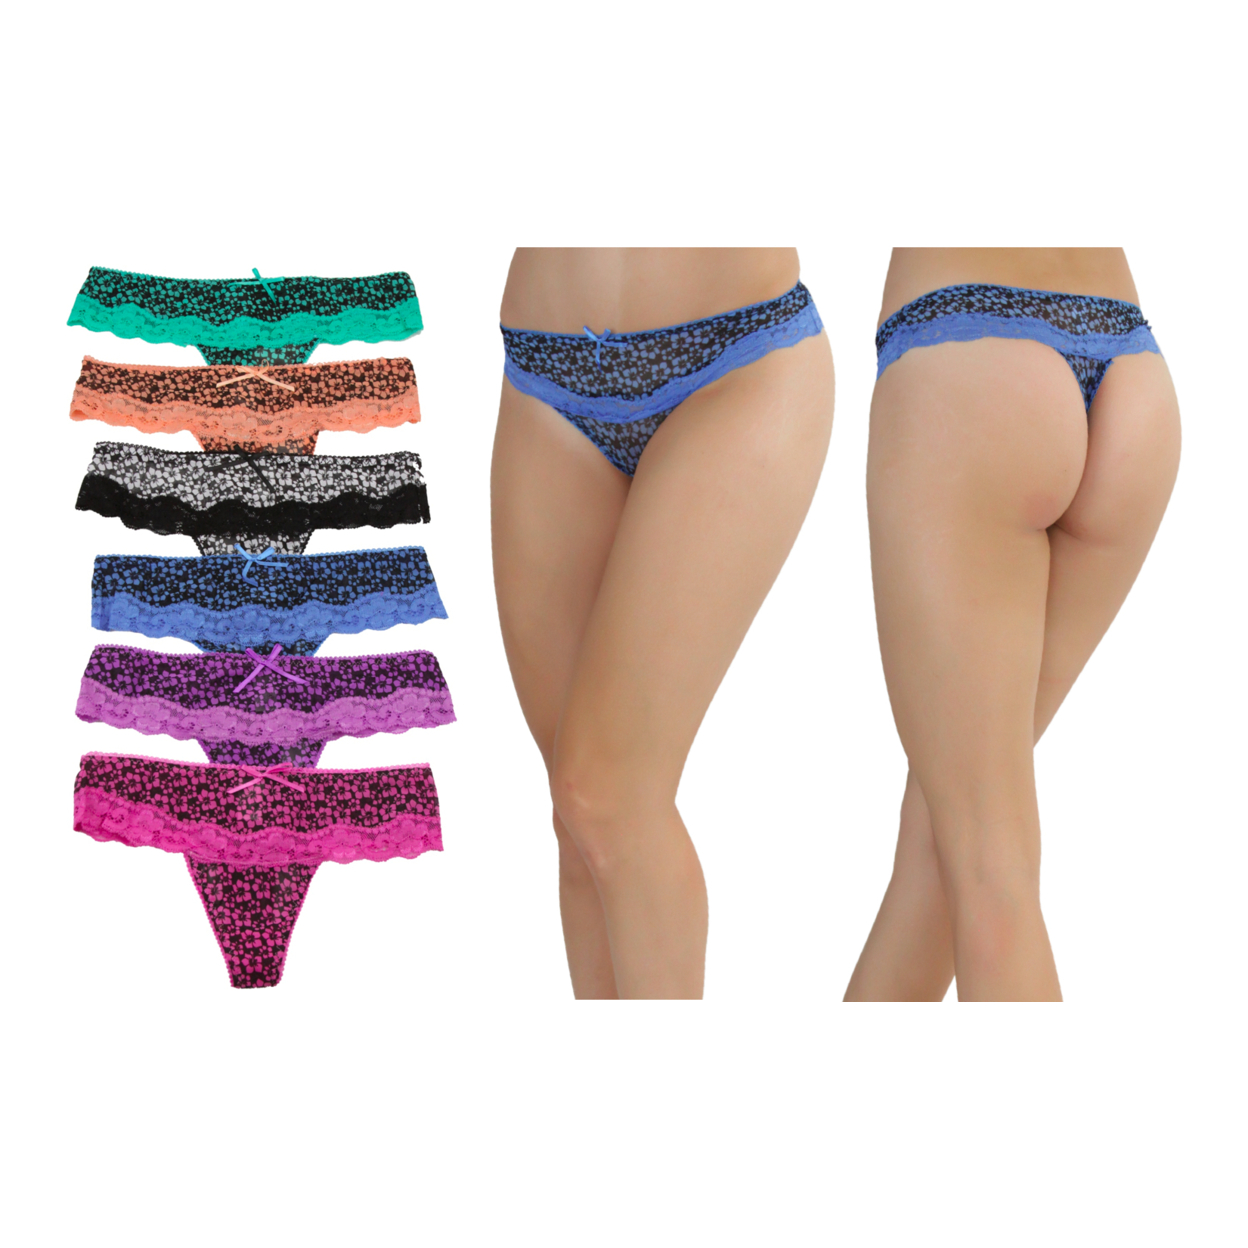 Tiny Daisy Lace Trim Thongs 6-Pack - M